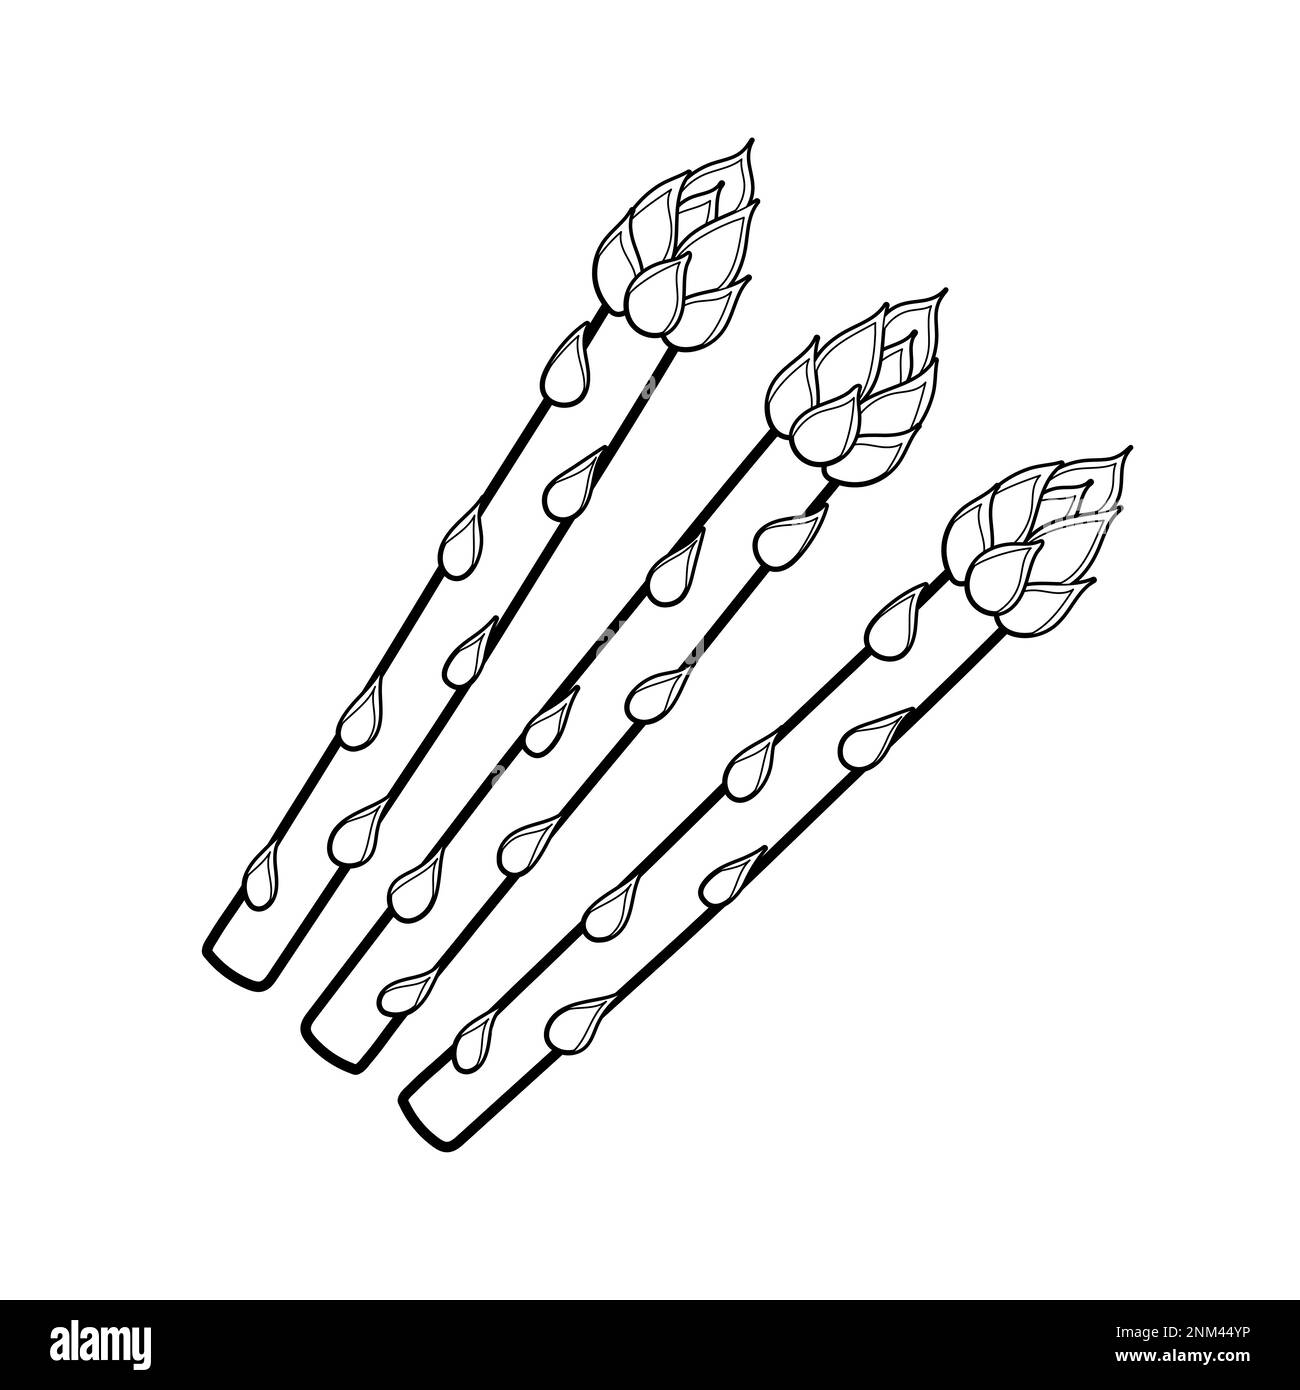 Asparagus coloring page for adults and kids. Black and white print with asparagus Stock Vector